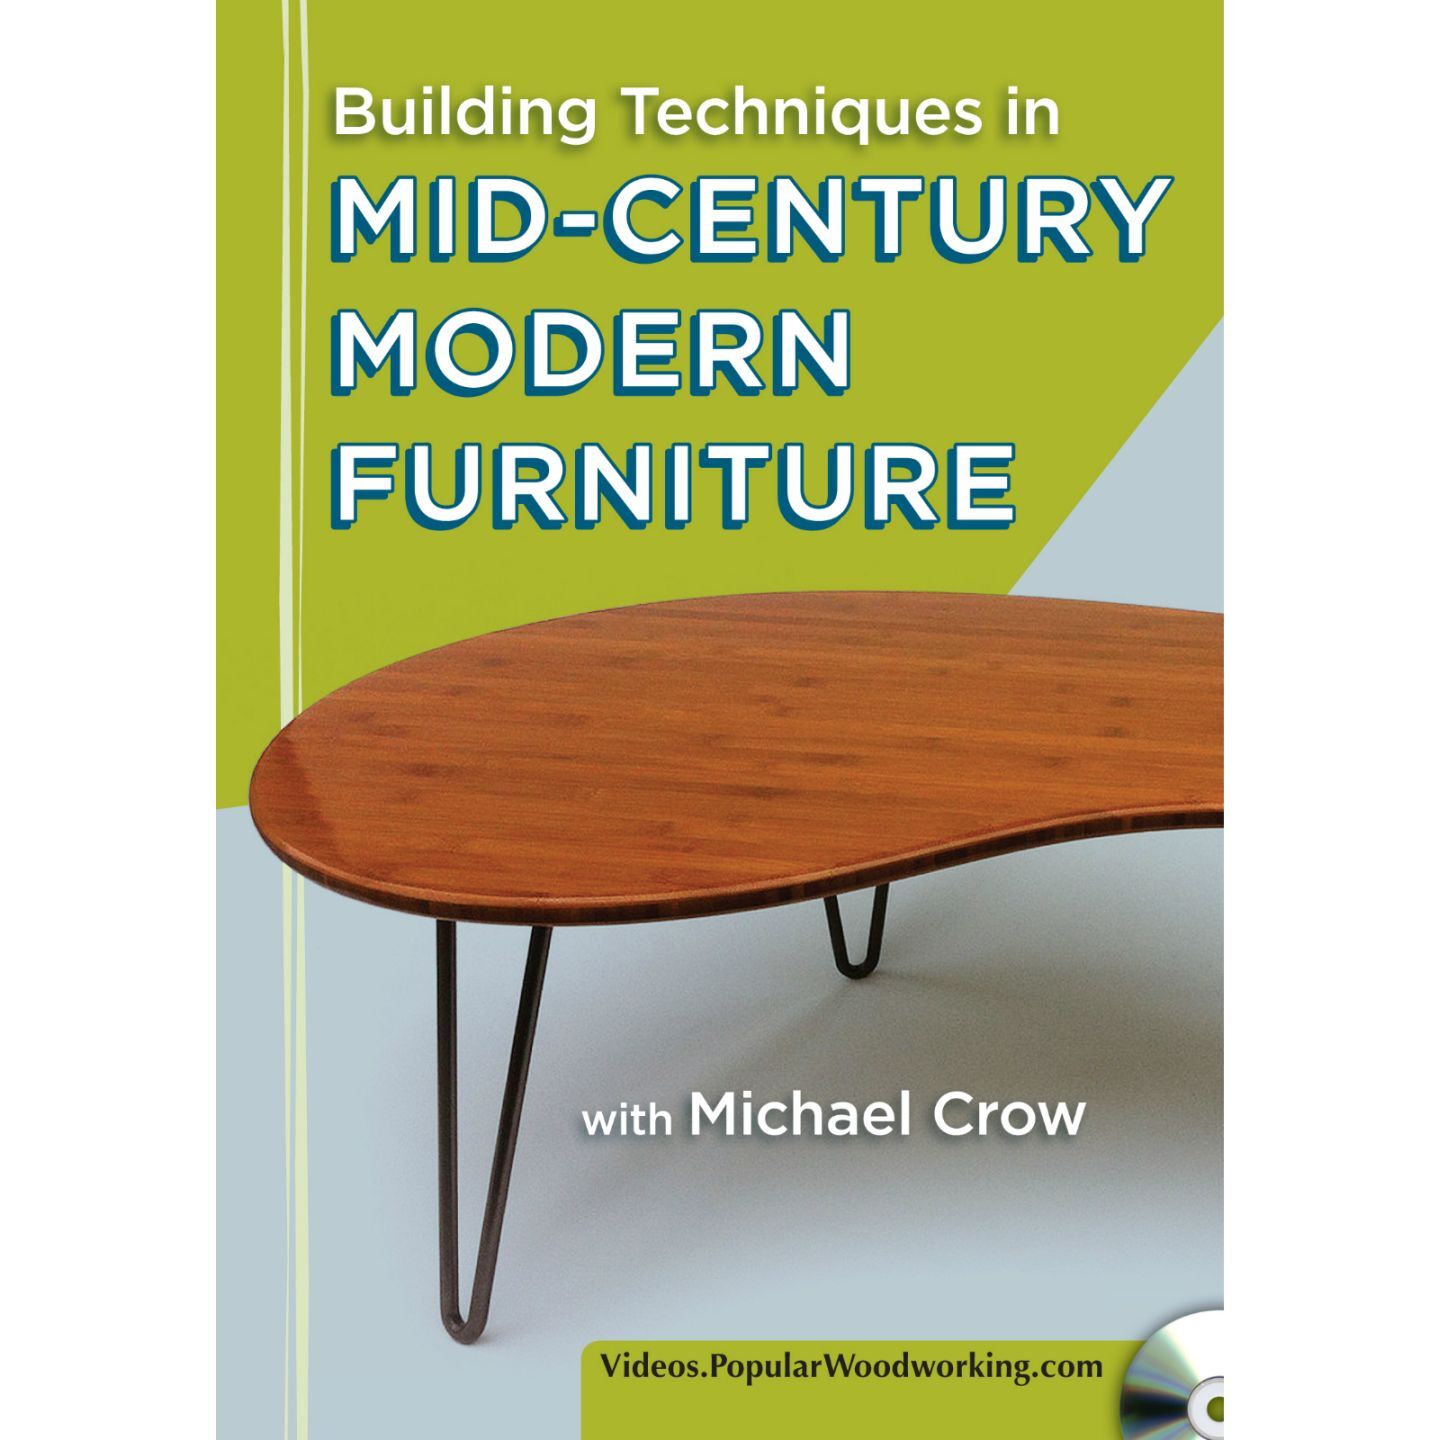 Building Techniques In Mid-Century Modern Furniture with Michael Crow (DVD)